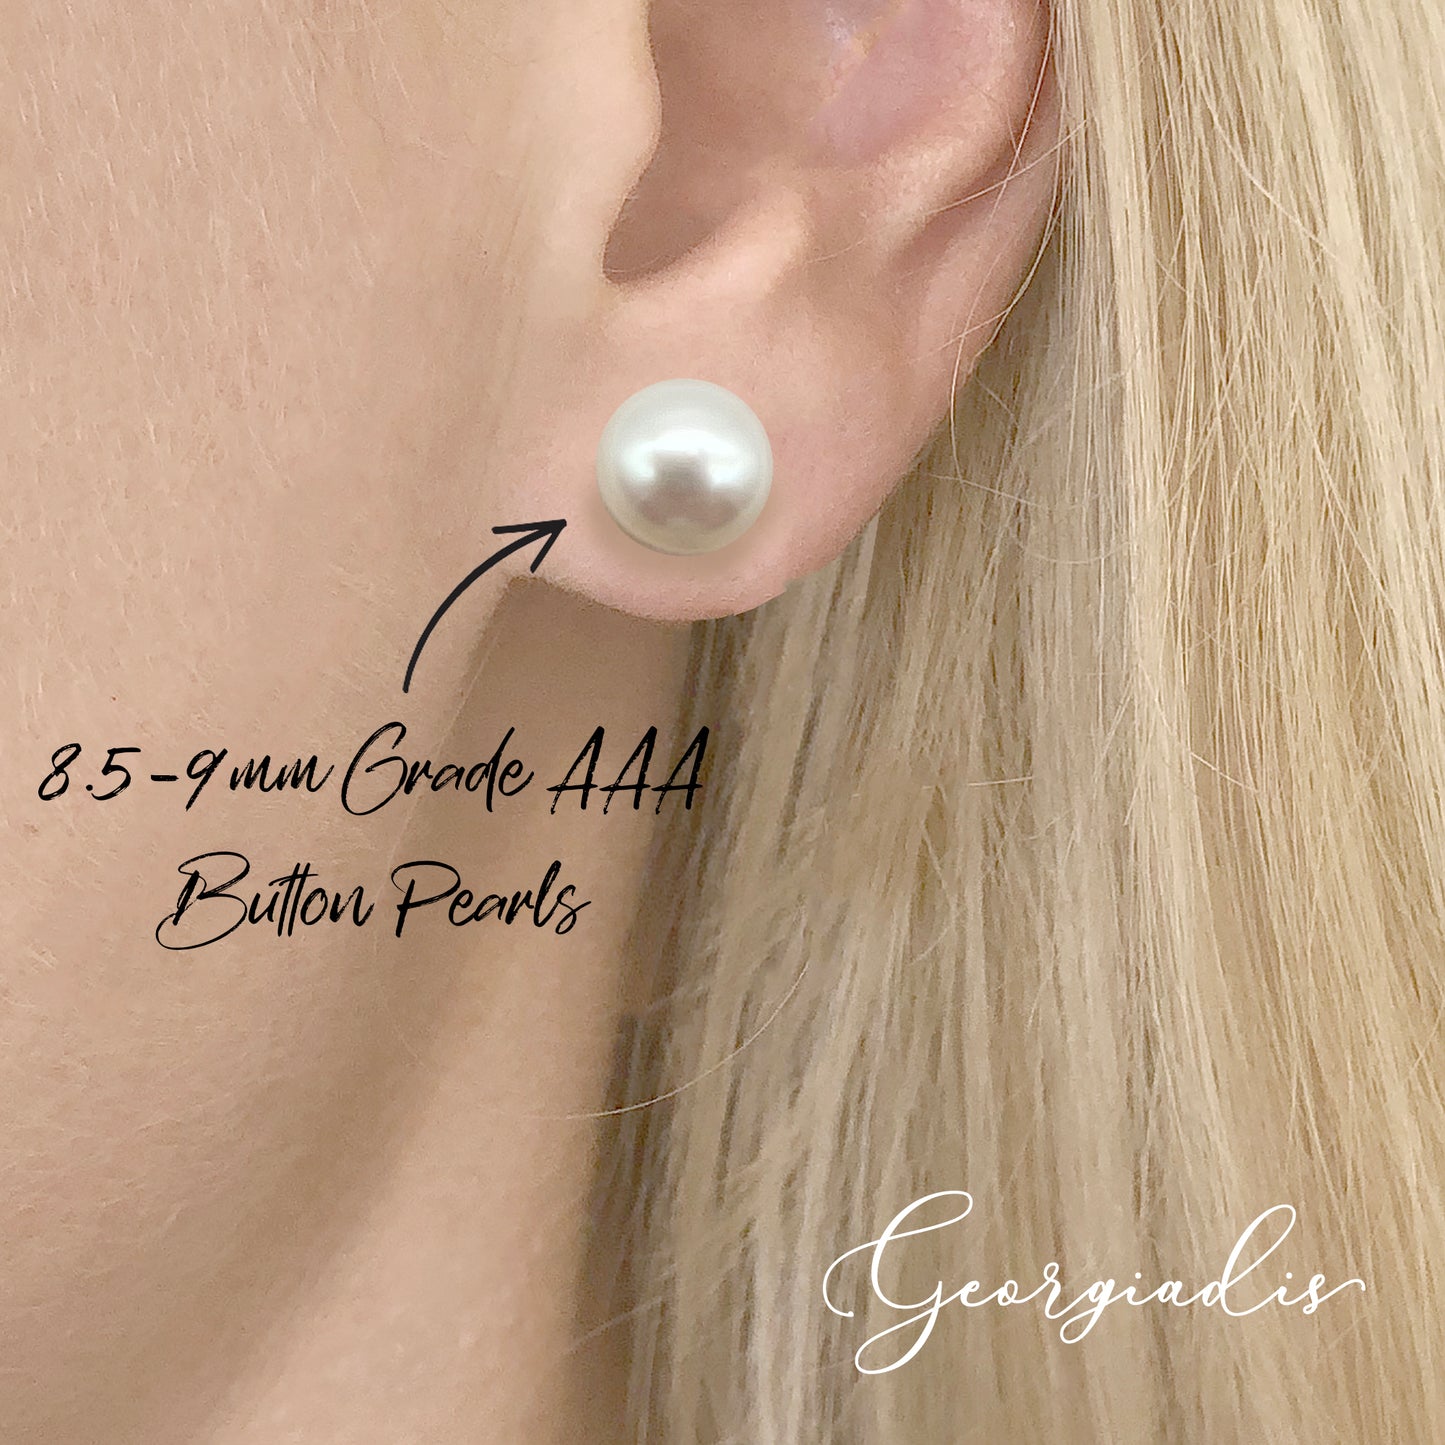 Genuine Freshwater Pearl Stud Earrings, featuring Grade AAA, High Lustre White Button Pearls and 925 Sterling Silver, Wealth, Prosperity, Intuition.